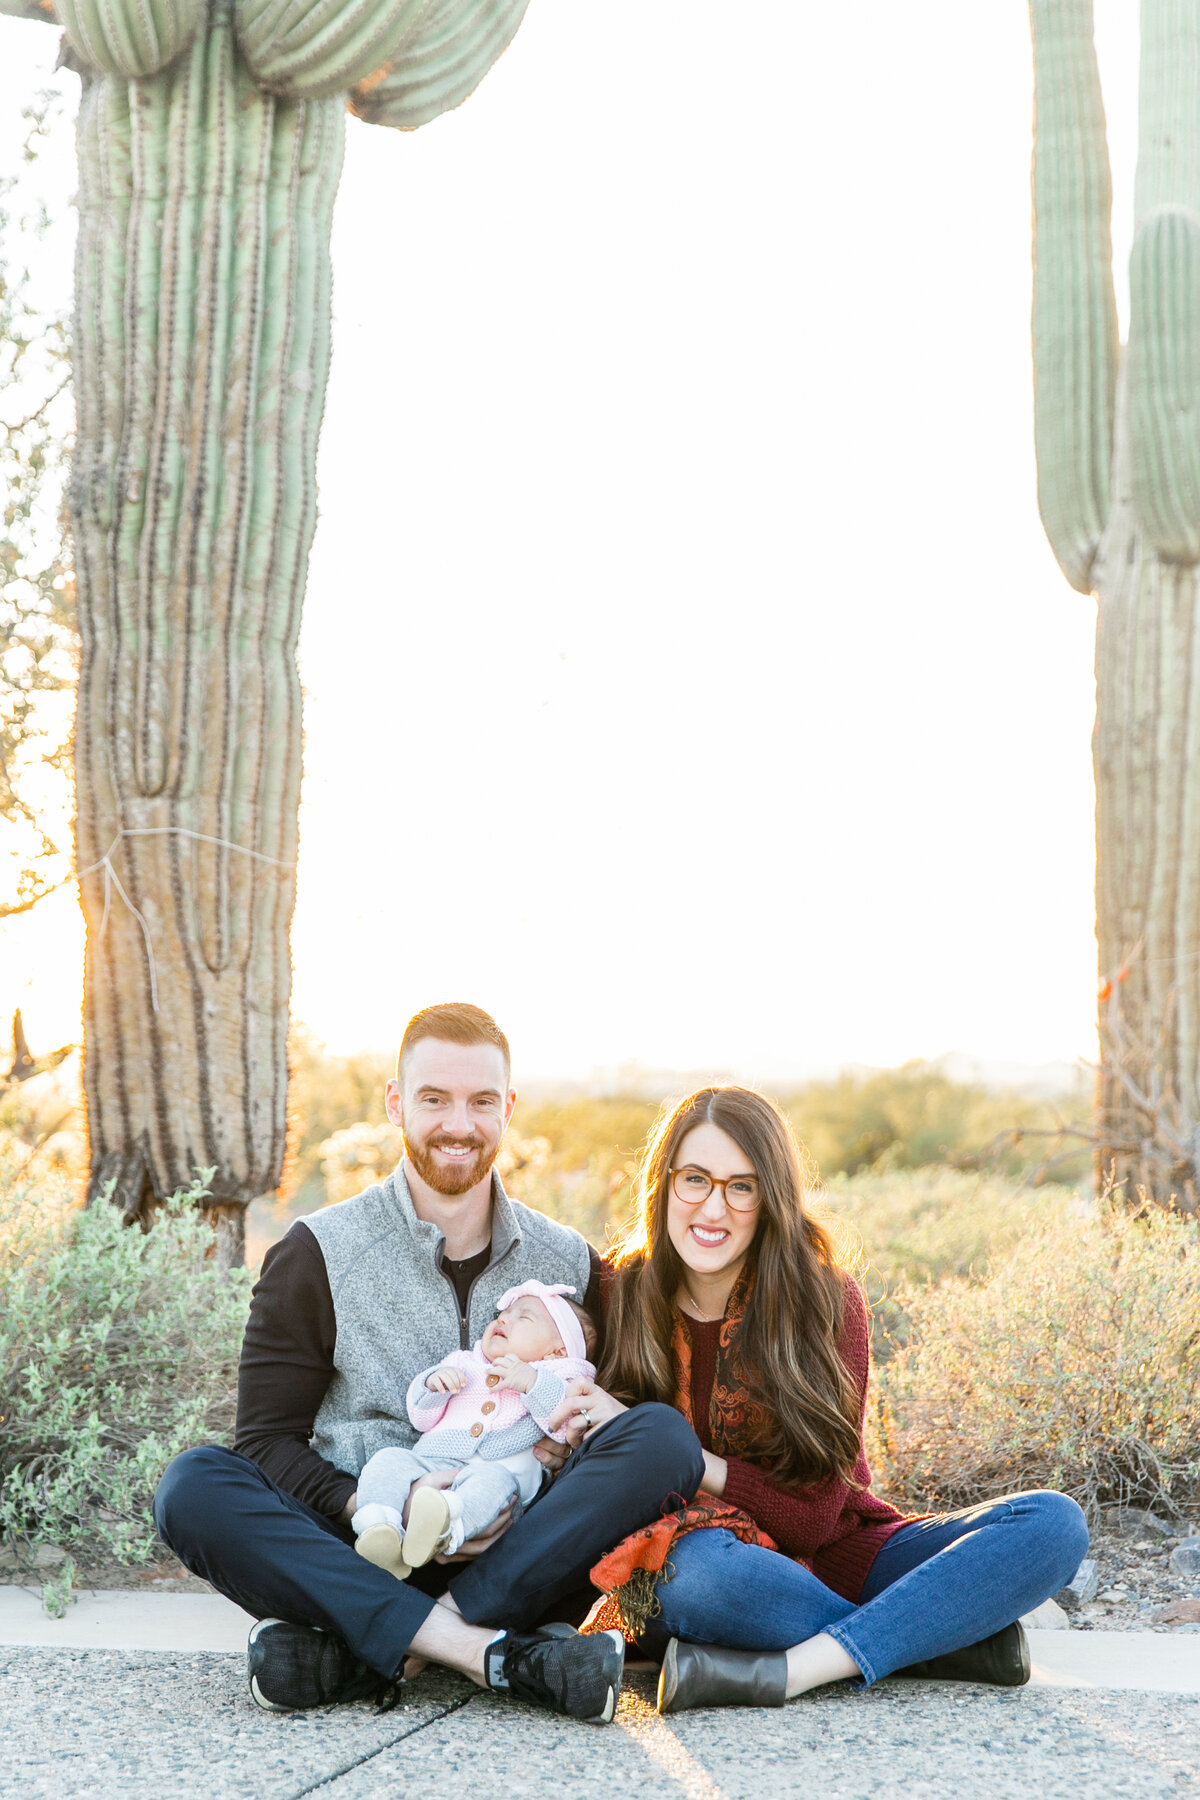 Karlie Colleen Photography - Scottsdale Family Photography - Lauren & Family-157